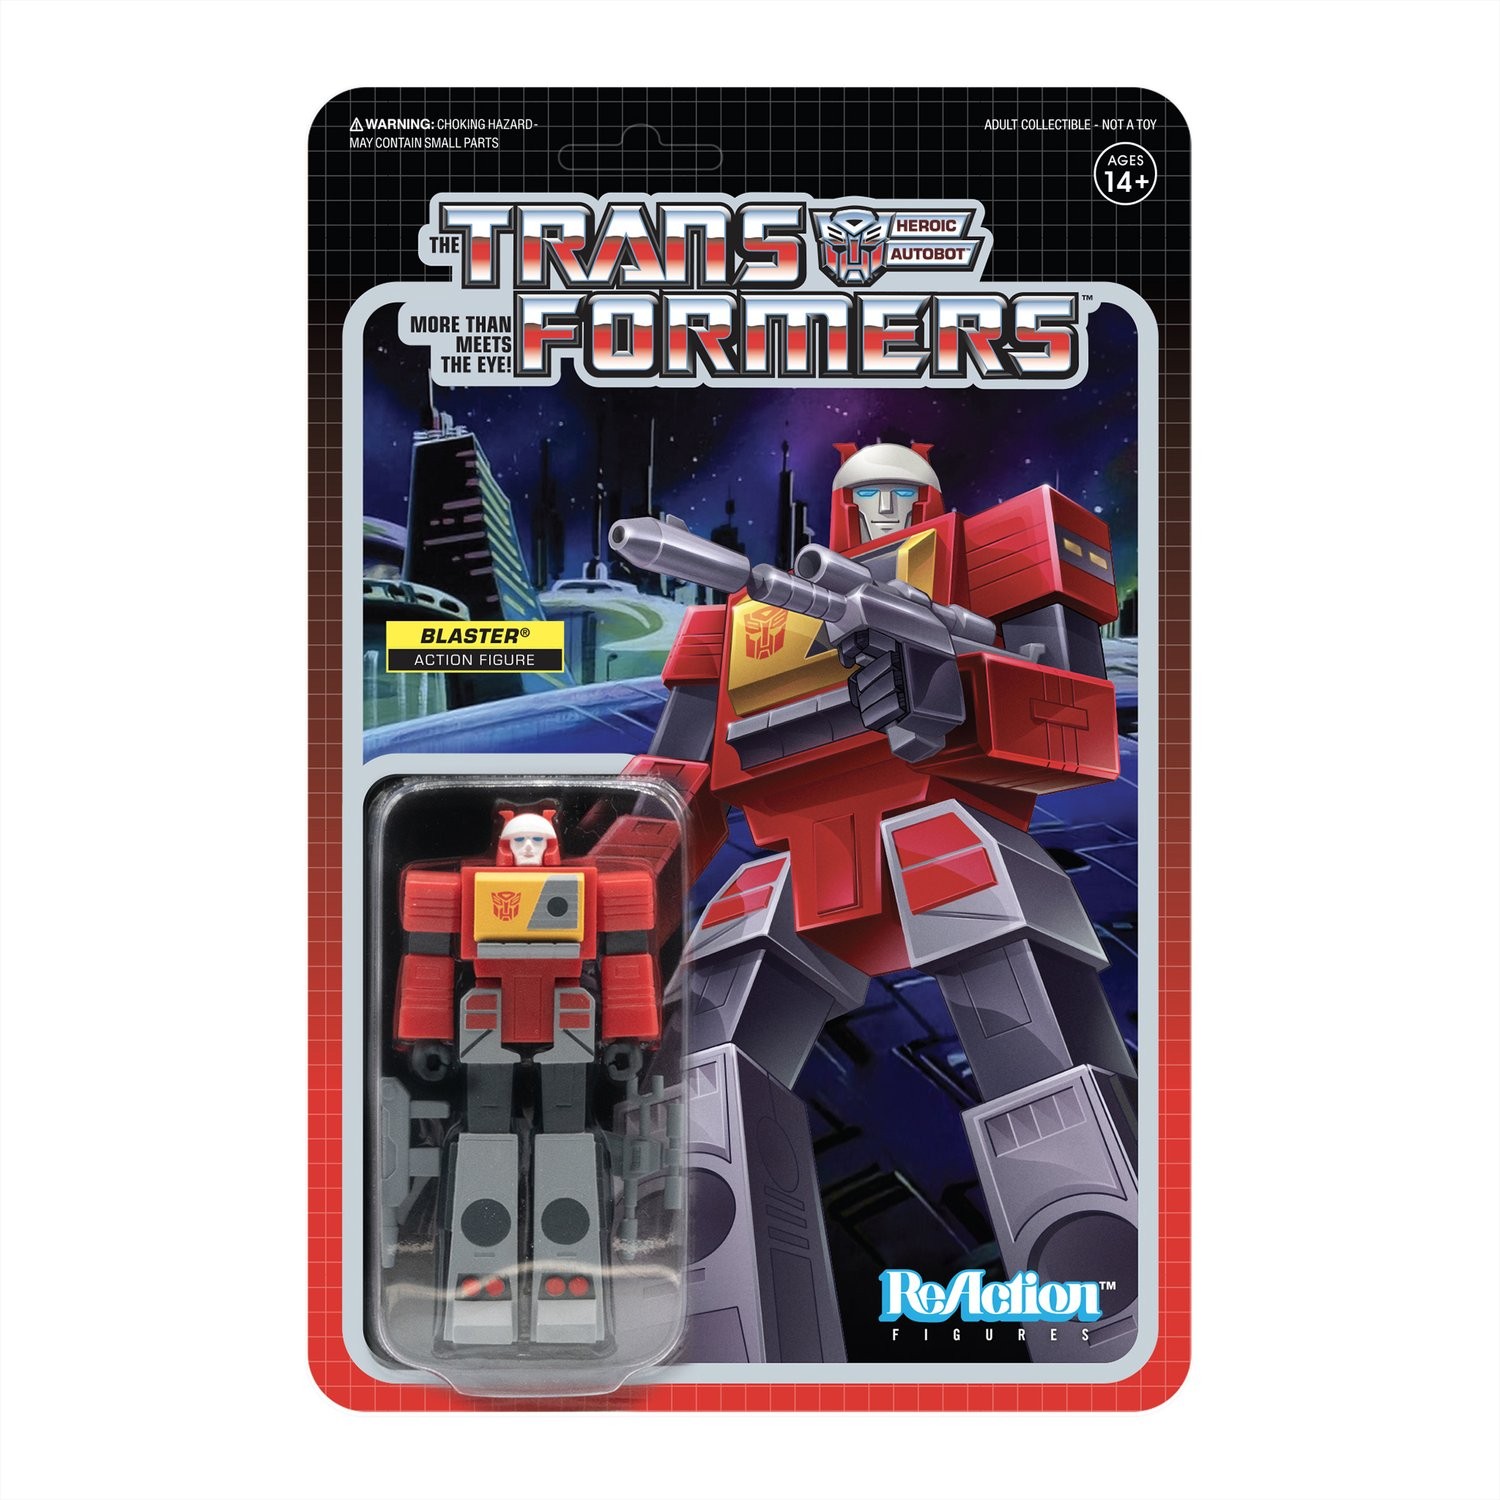 Transformers News: New Super7 Transformers ReActions Figures Revealed- Blitzwing, Perceptor, Dirge and Blaster